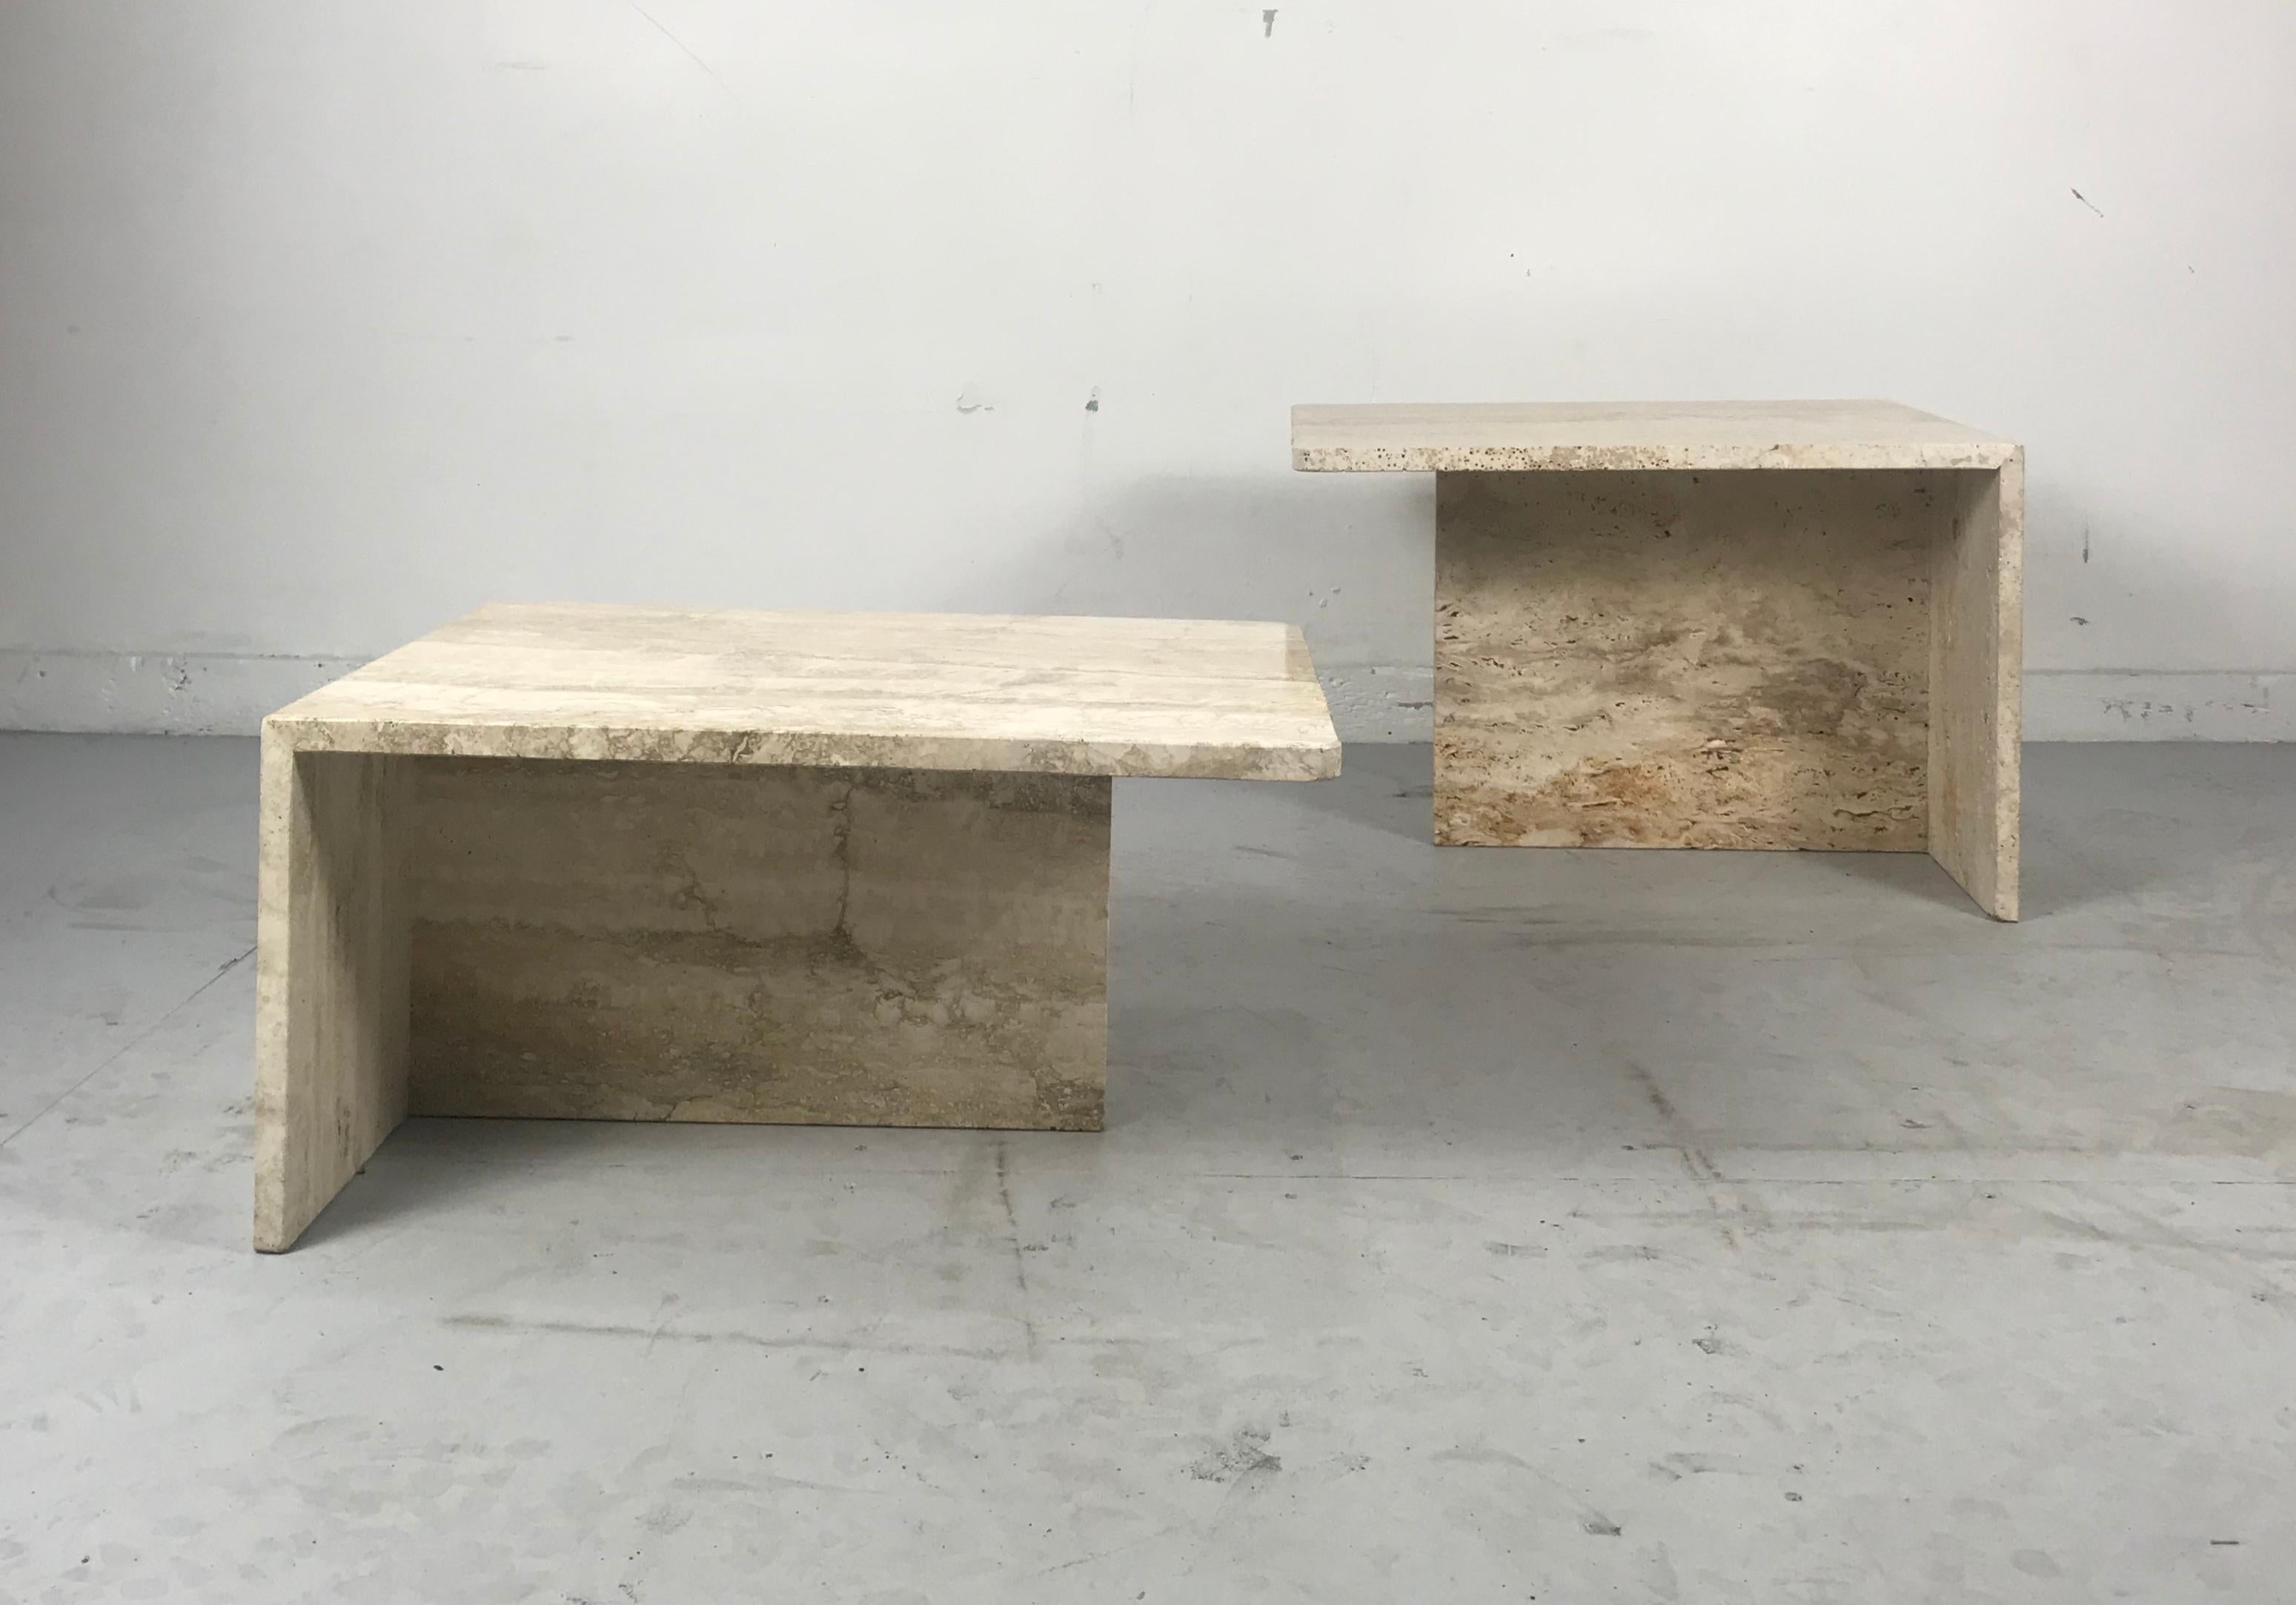 Stunning pair of architectural Italian Modernist travertine tables, Willy Rizzo style, Simple, elegant versatile design, used as coffee/Cocktail Tables, end tables, pedestals. Stands etc. Both tables measure 23